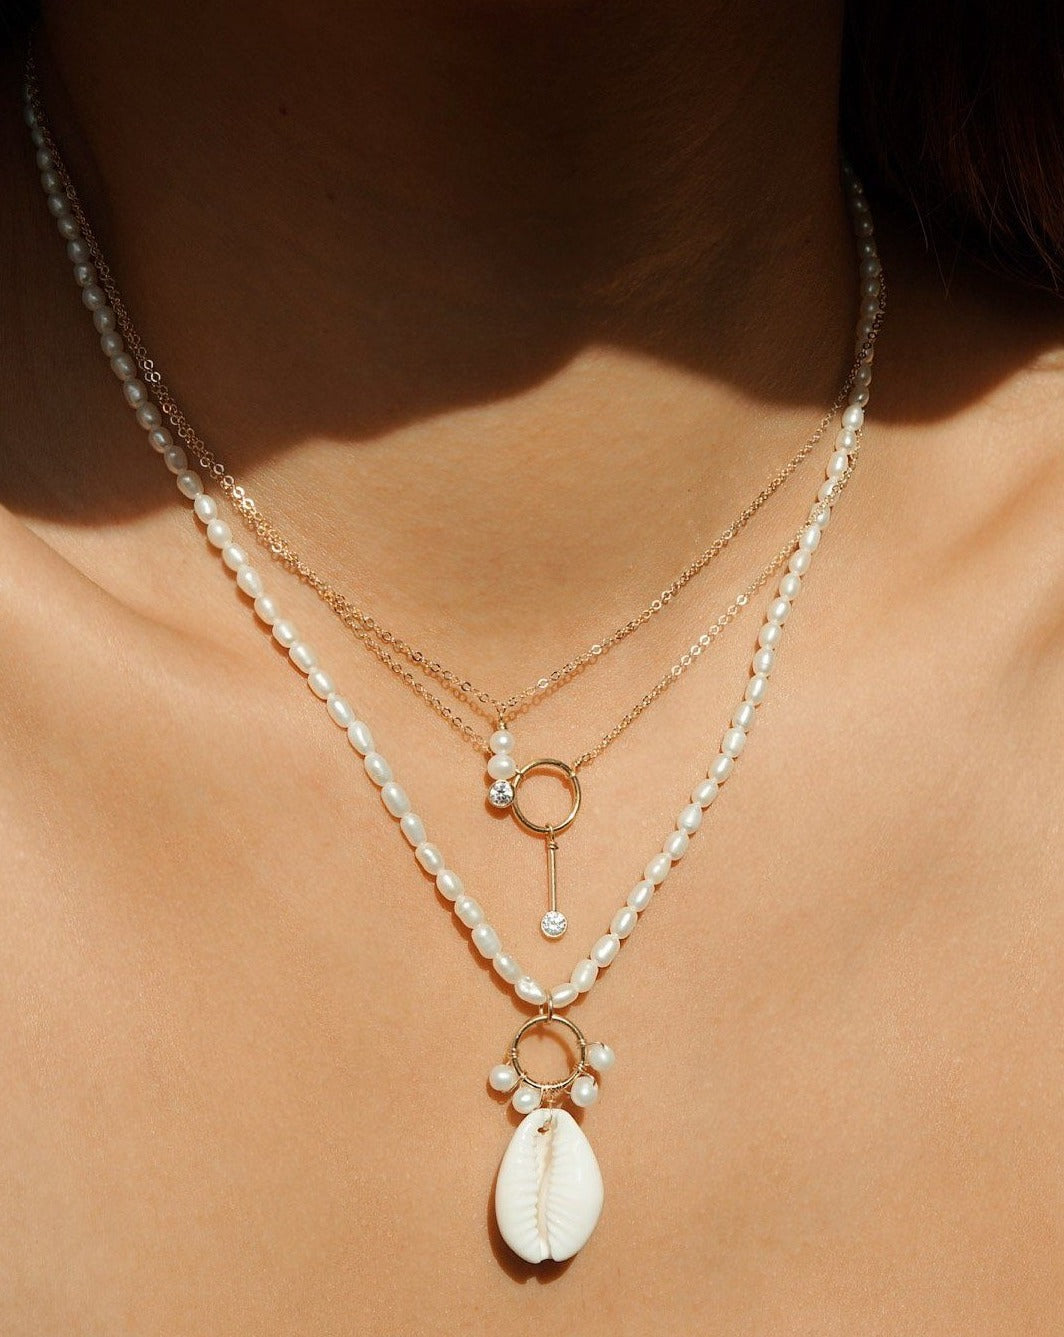 Coco Necklace by KOZAKH. A 16 to 18 inch adjustable length necklace in 14K Gold Filled, featuring 4mm to 5mm white round Pearls and a 3mm Cubic Zirconia bezel.